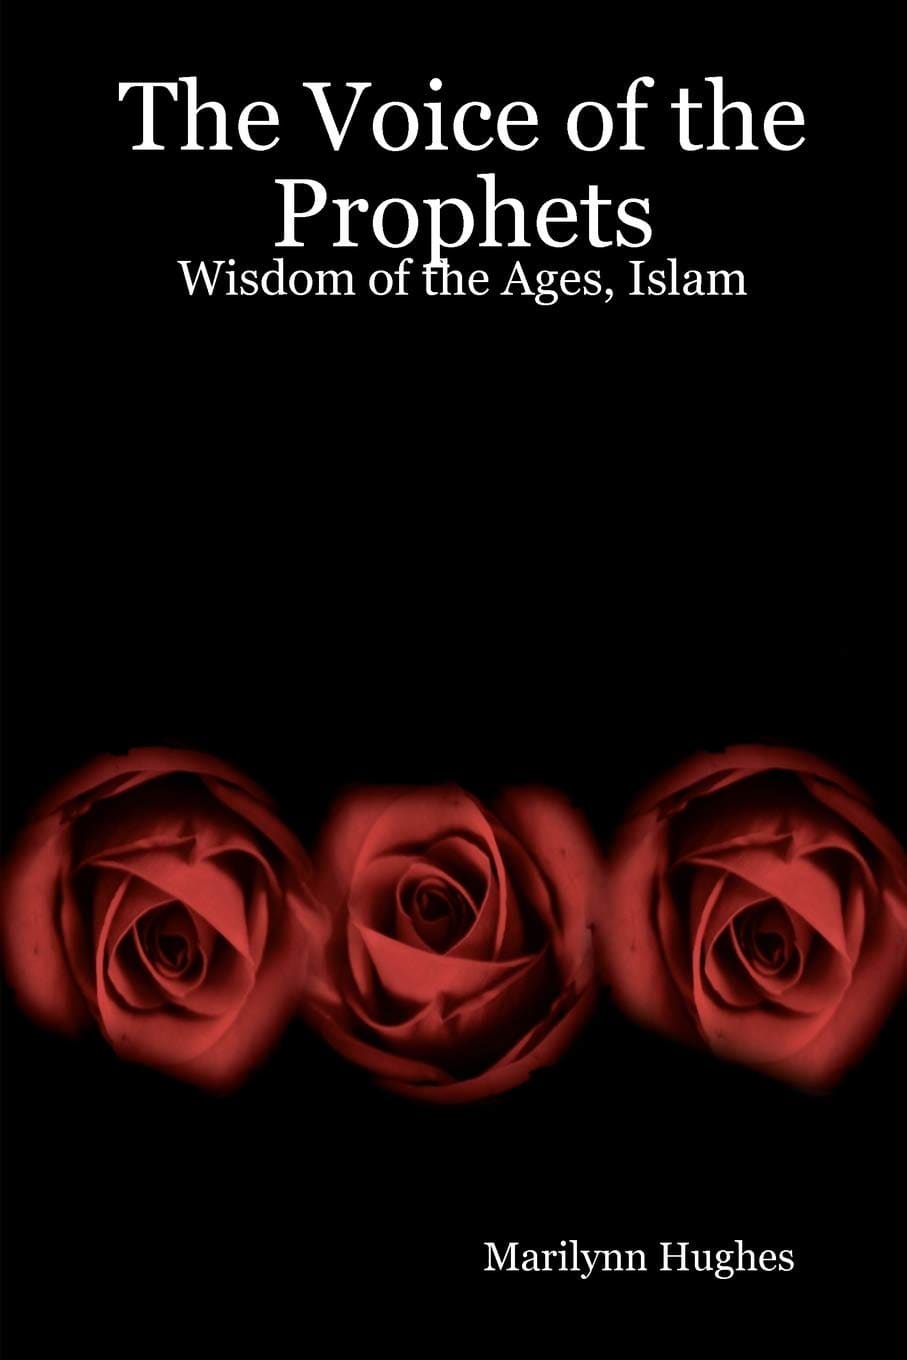 Wisdom of the Ages, Islam, By Marilynn Hughes - An Encyclopedia of Ancient Sacred Texts in Twelve Volumes - An Out-of-Body Travel Book